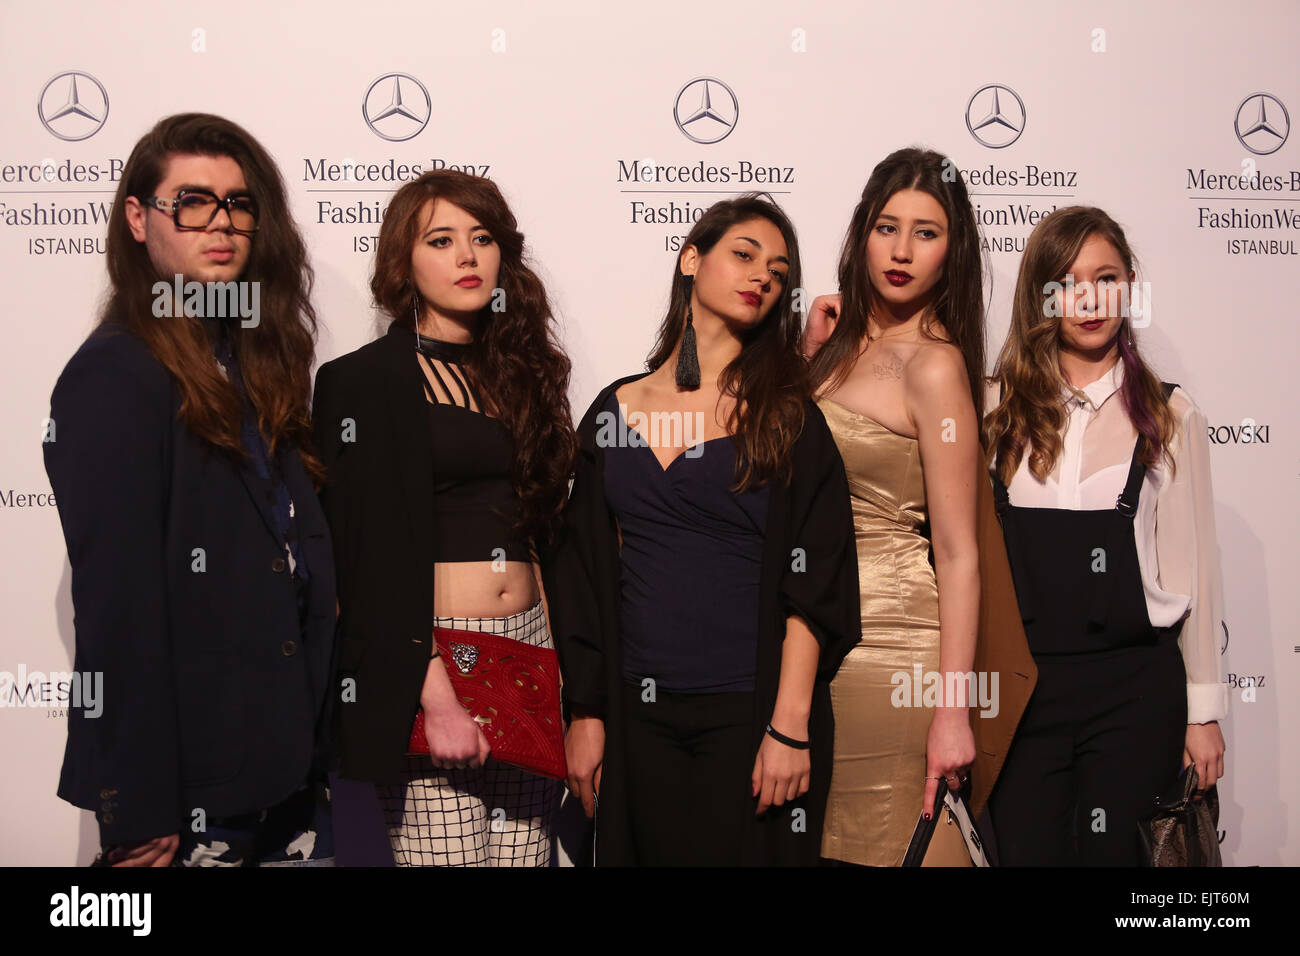 ISTANBUL TURKEY MARCH 20 2015 People posing Lounge Mercedes-Benz Fashion Week Istanbul Stock Photo